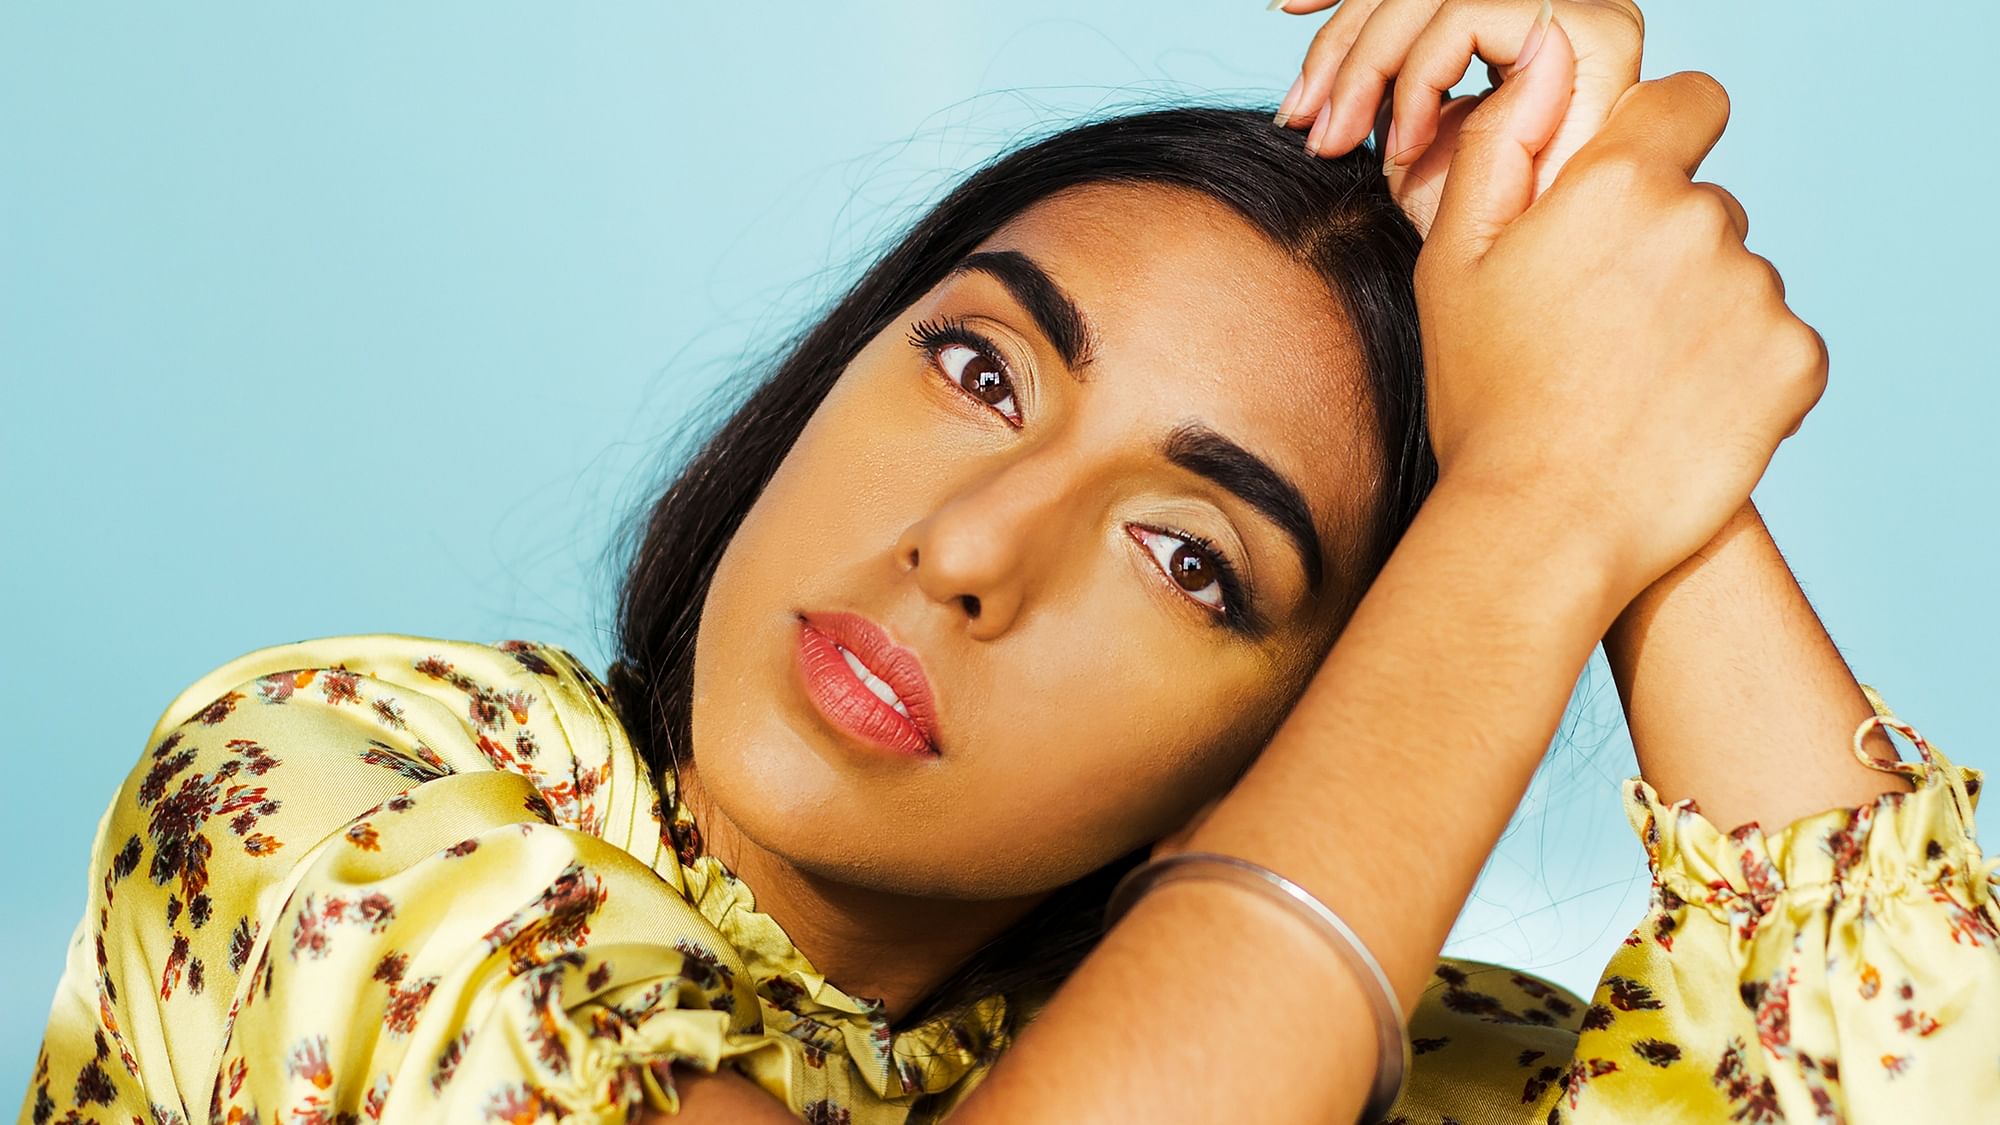 Indian-origin author Rupi Kaur’s labour of love, milk and honey has spent over a year on the NYT bestsellers list.